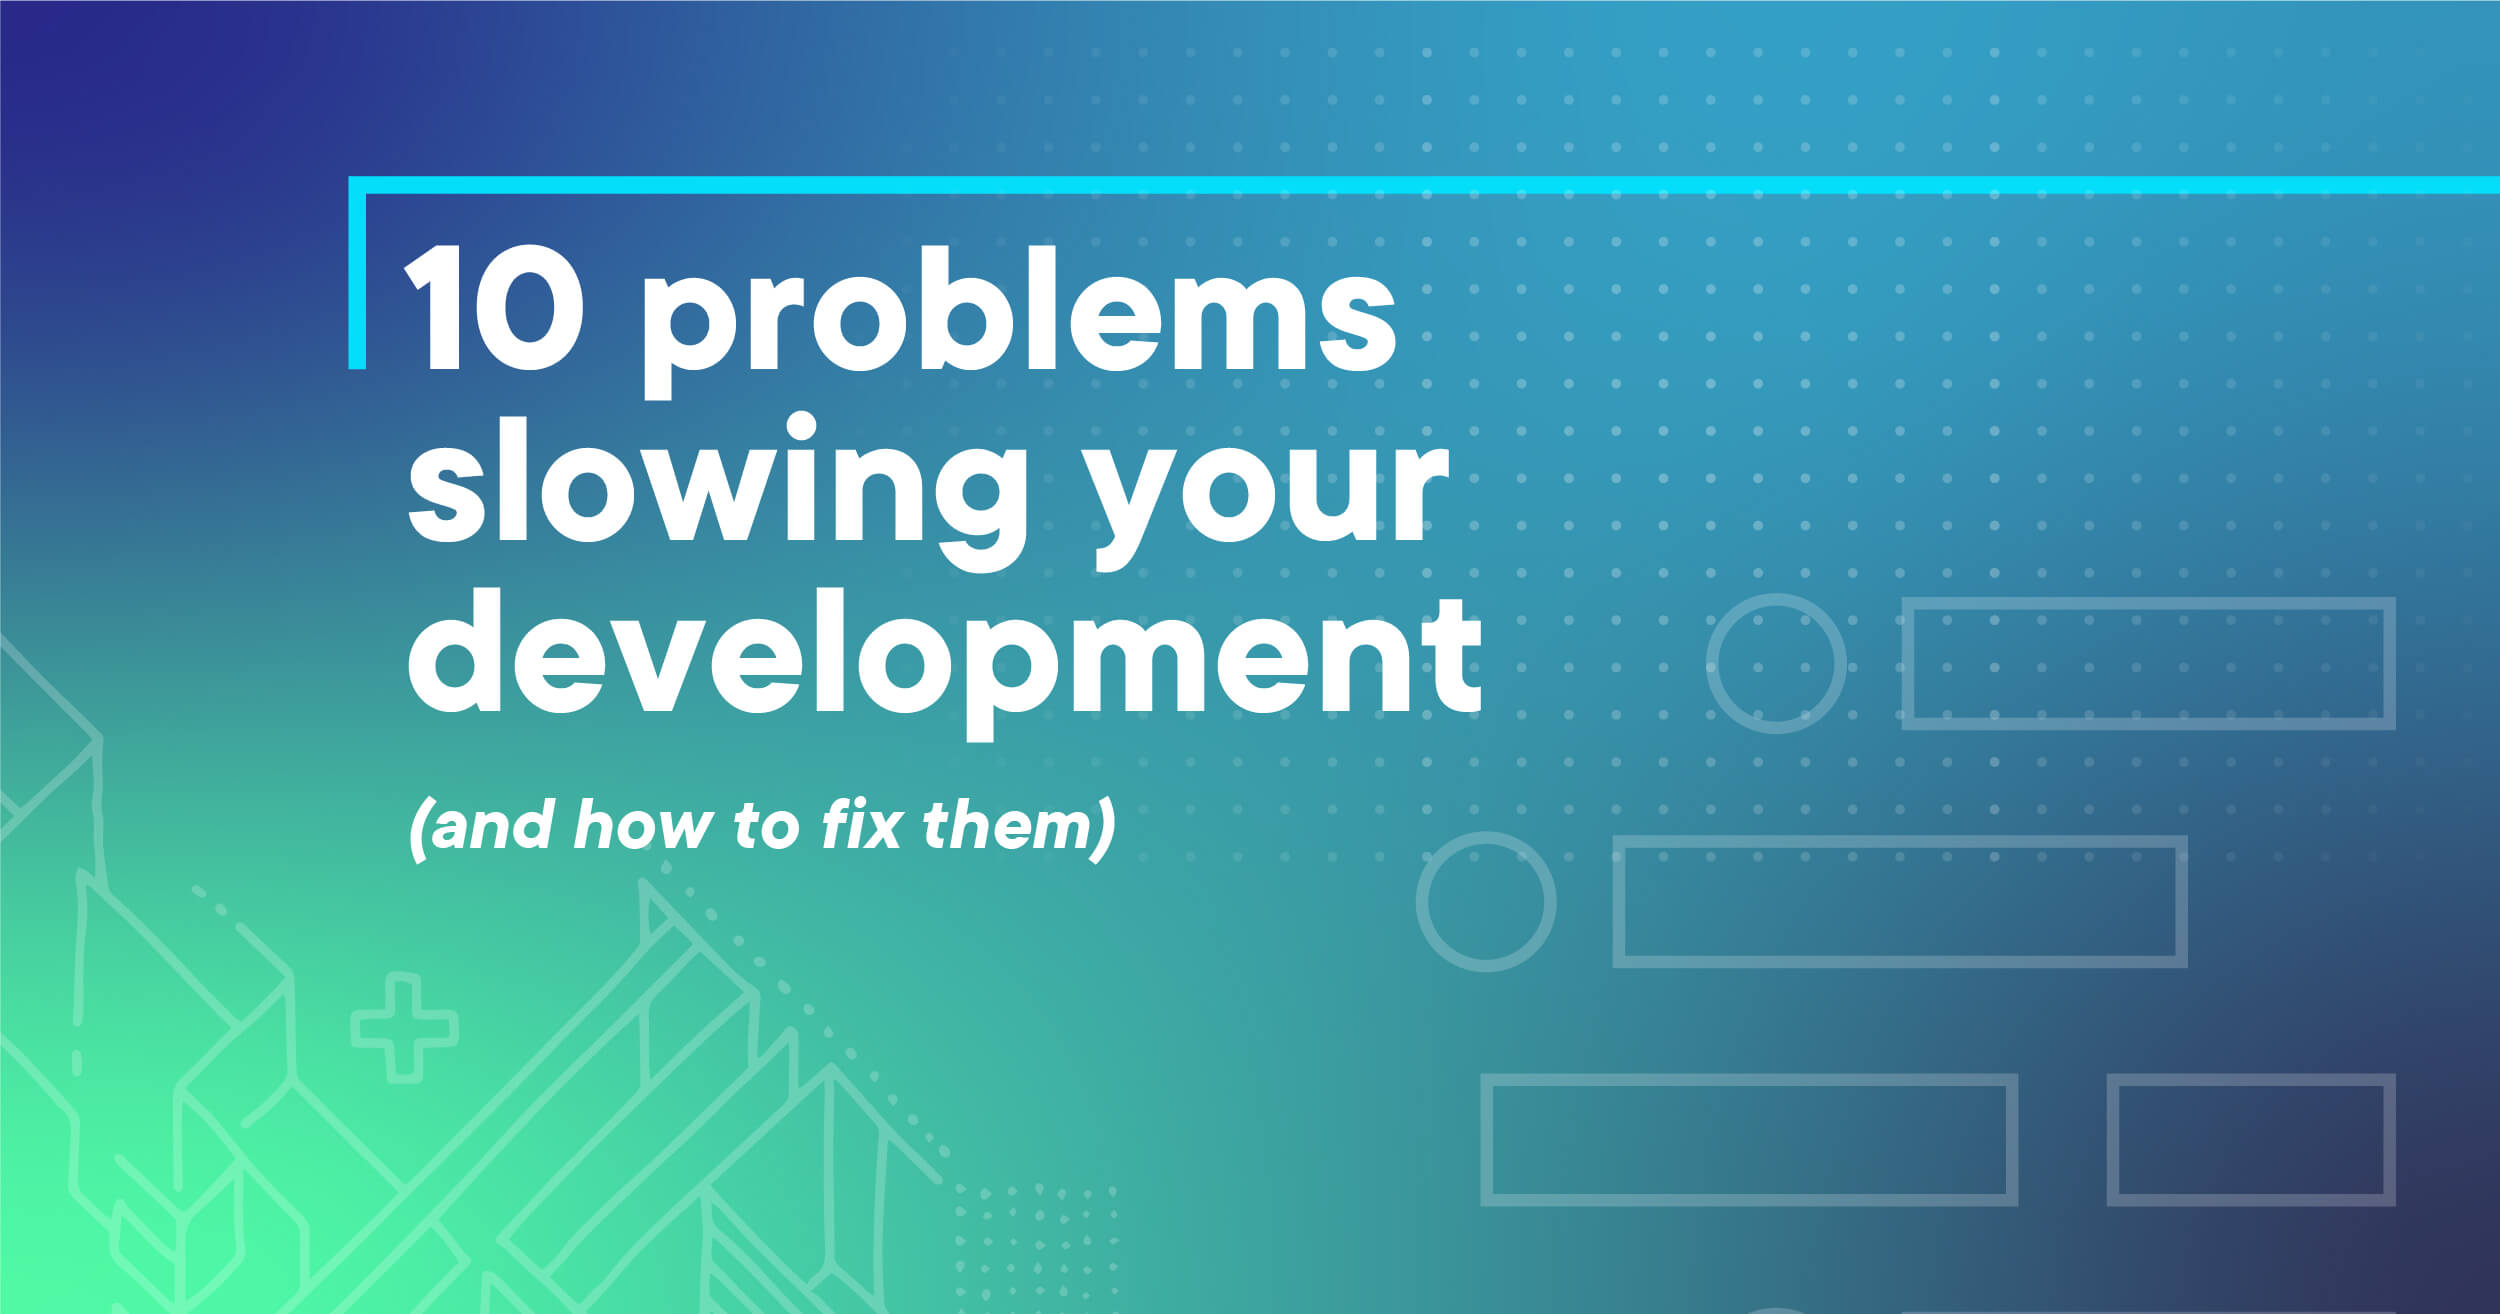 The 10 problems slowing your development workflow (and how to fix them)